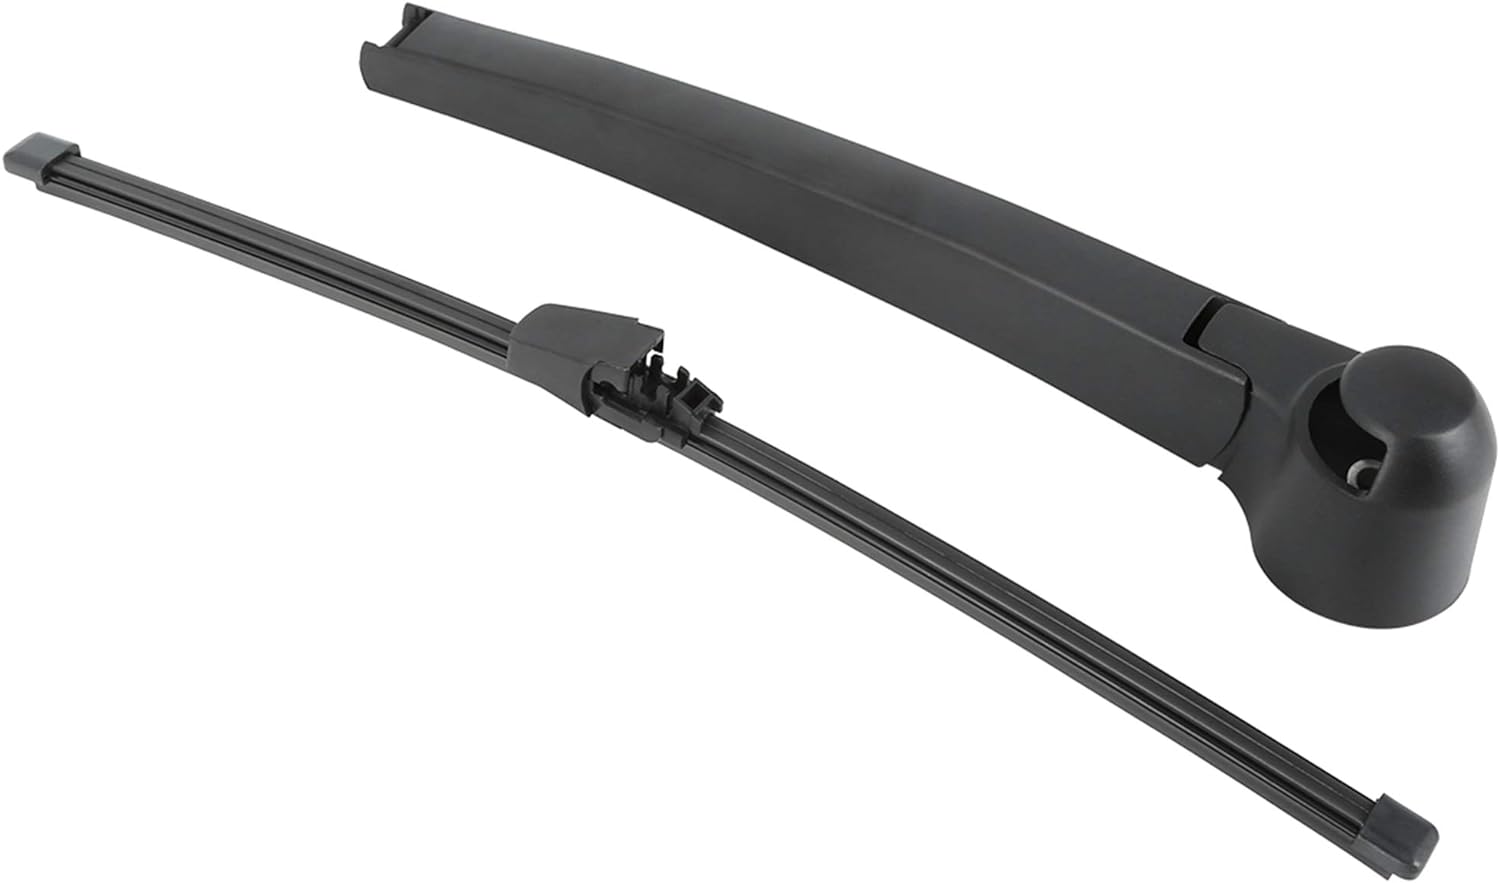 Best Windshield Wipers for Your VW Golf or GTI: Get the Right Set of Blades for Clear Visibility